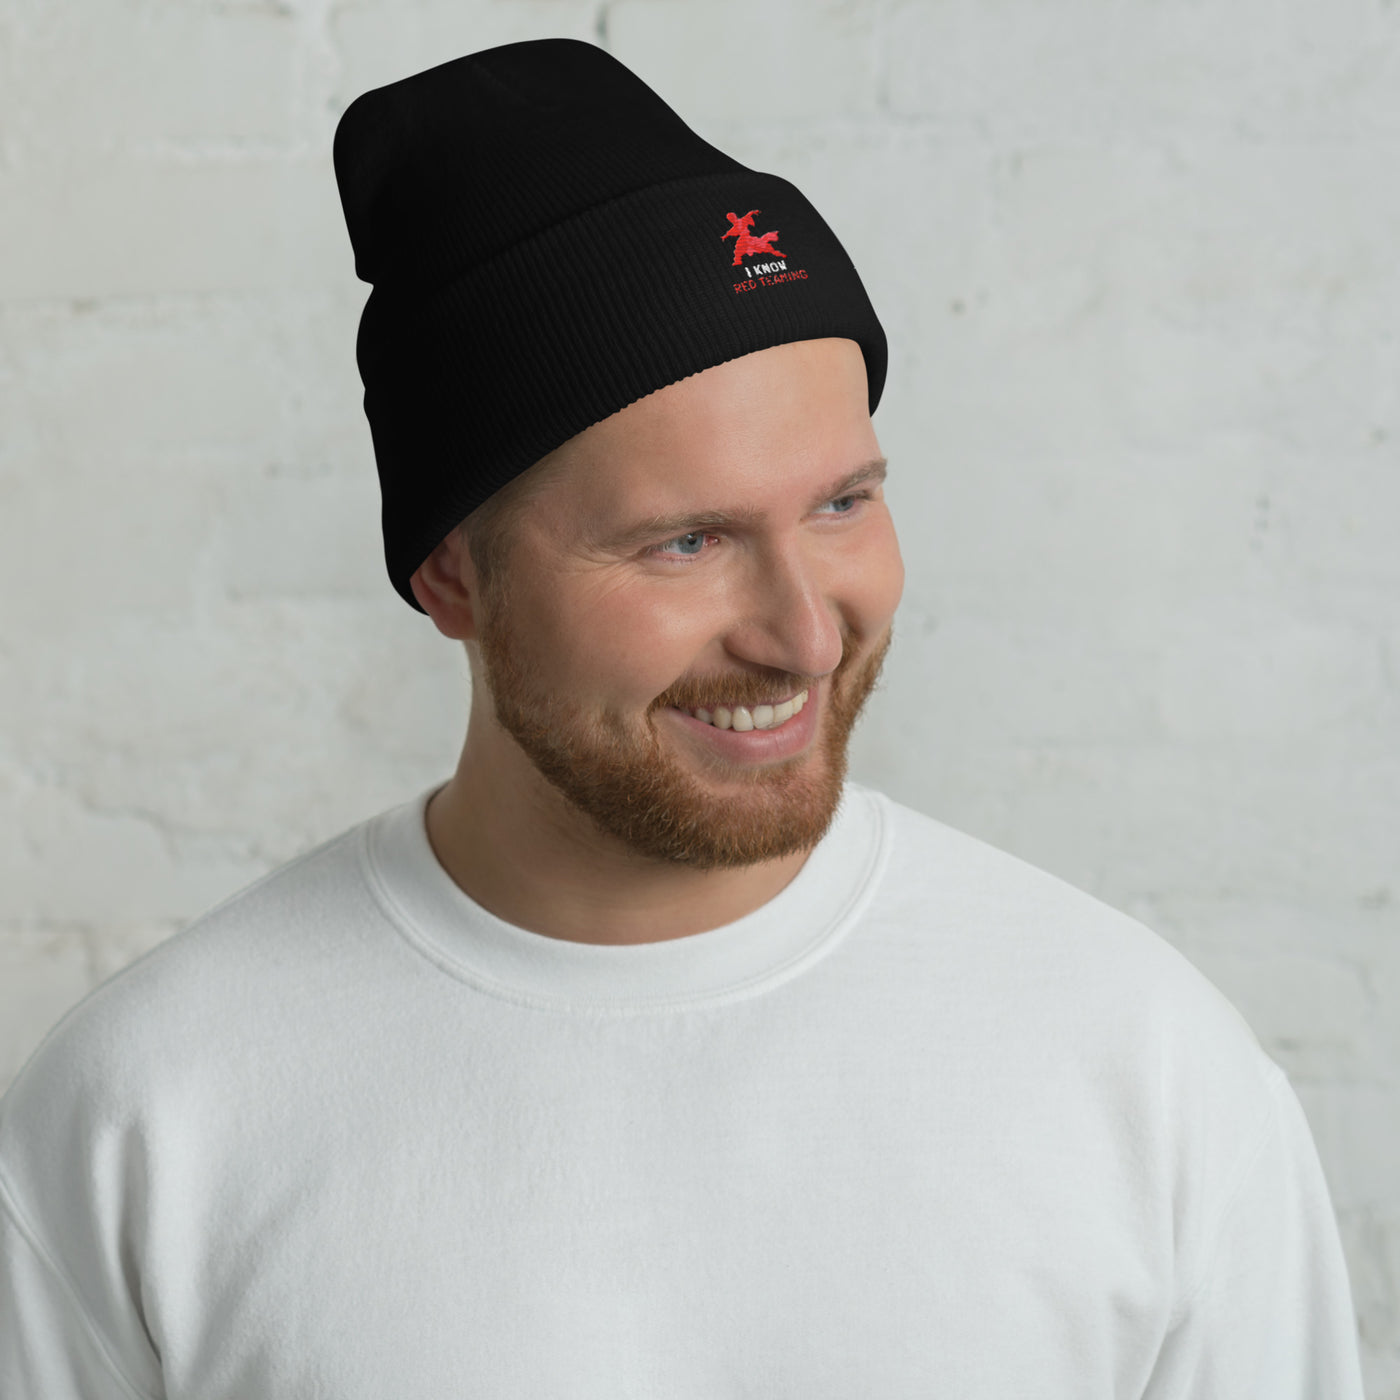 I Know Red Teaming - Cuffed Beanie